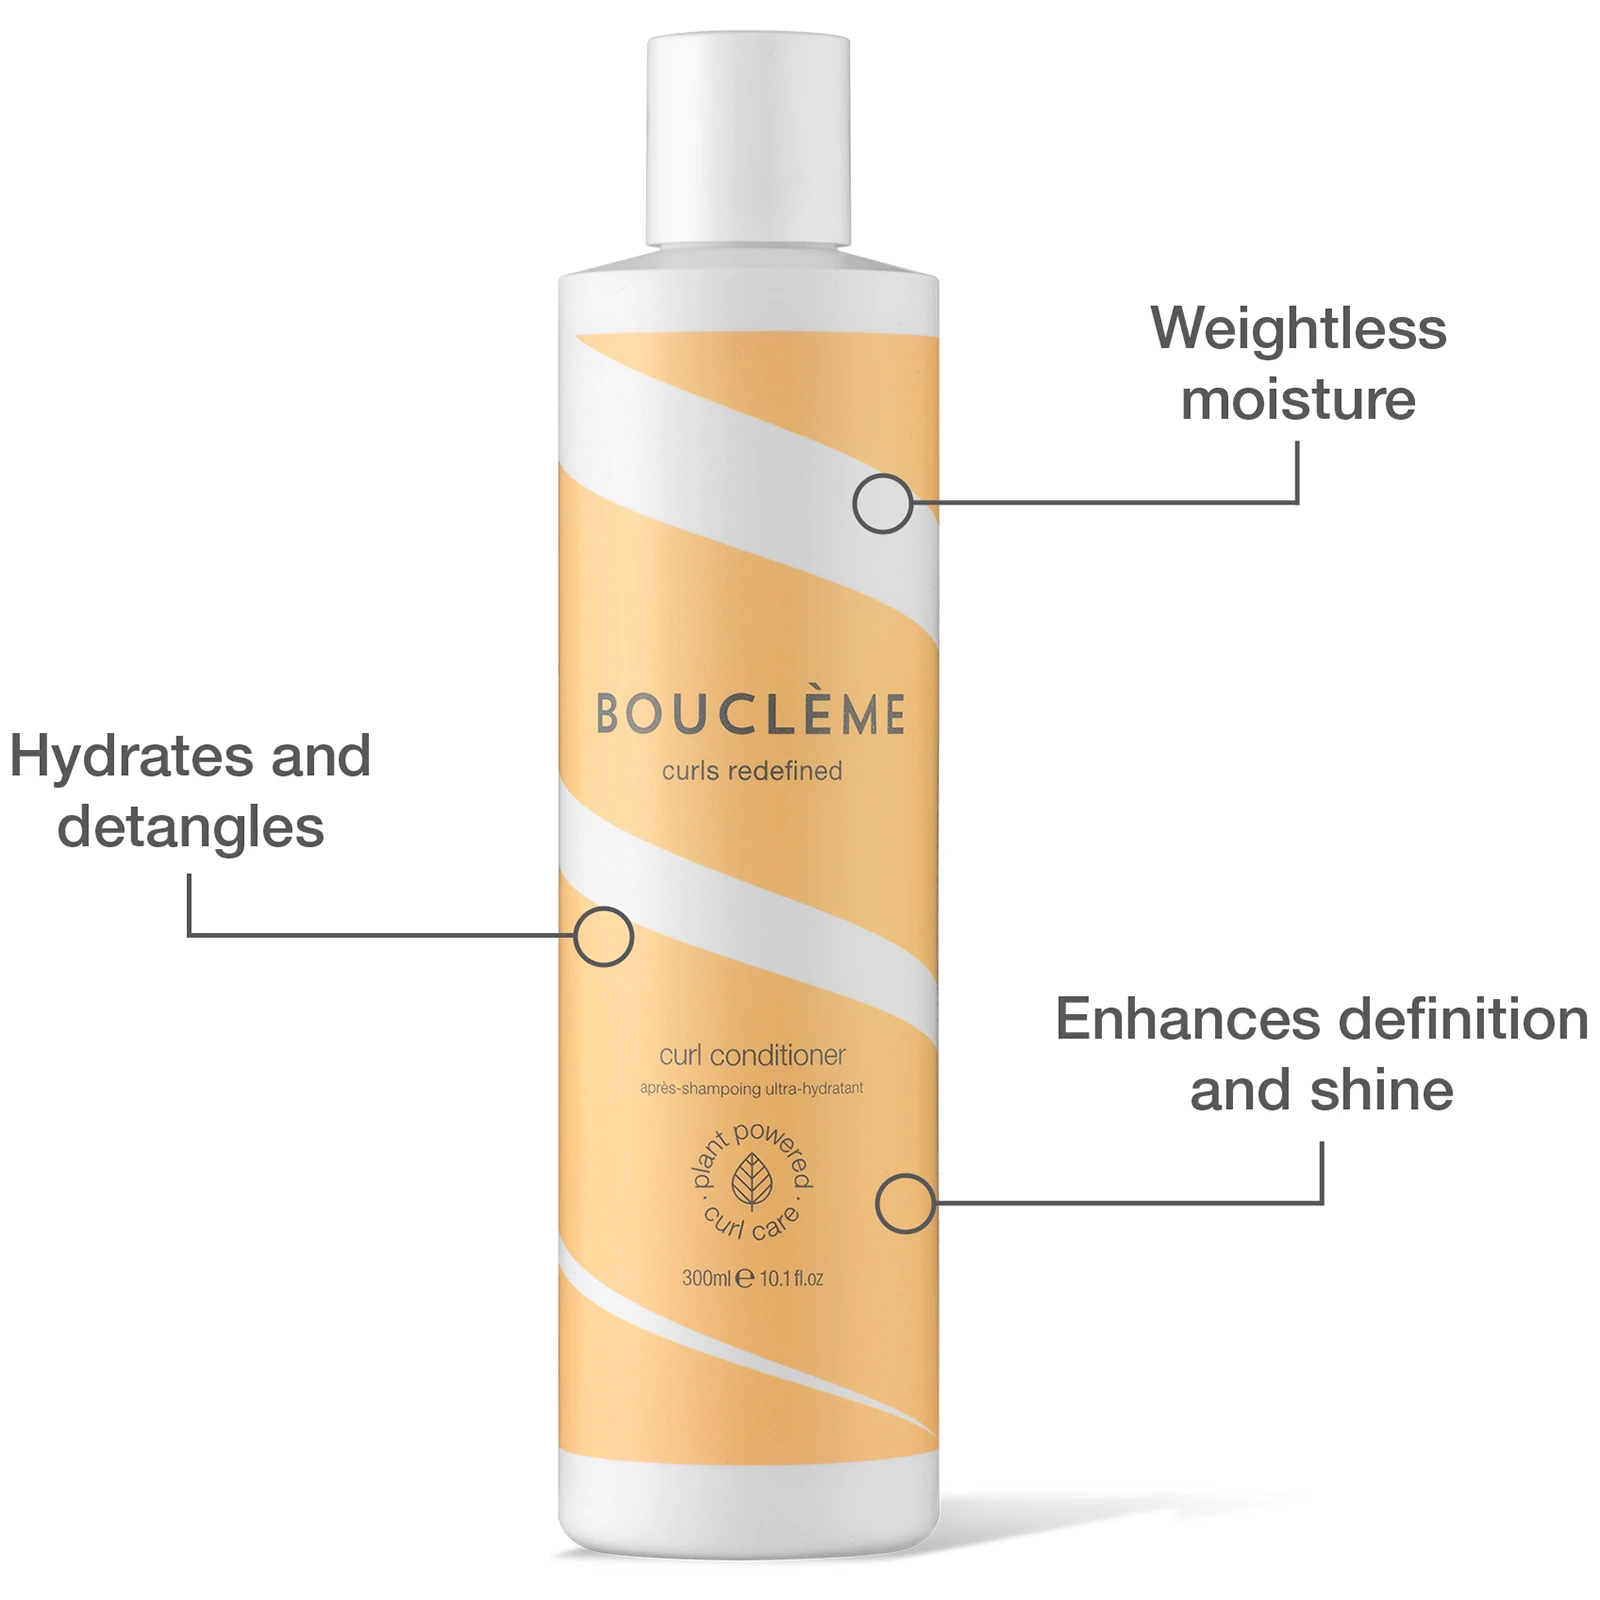 weightless moisture, hydrates and detangles, enhances definition and shine